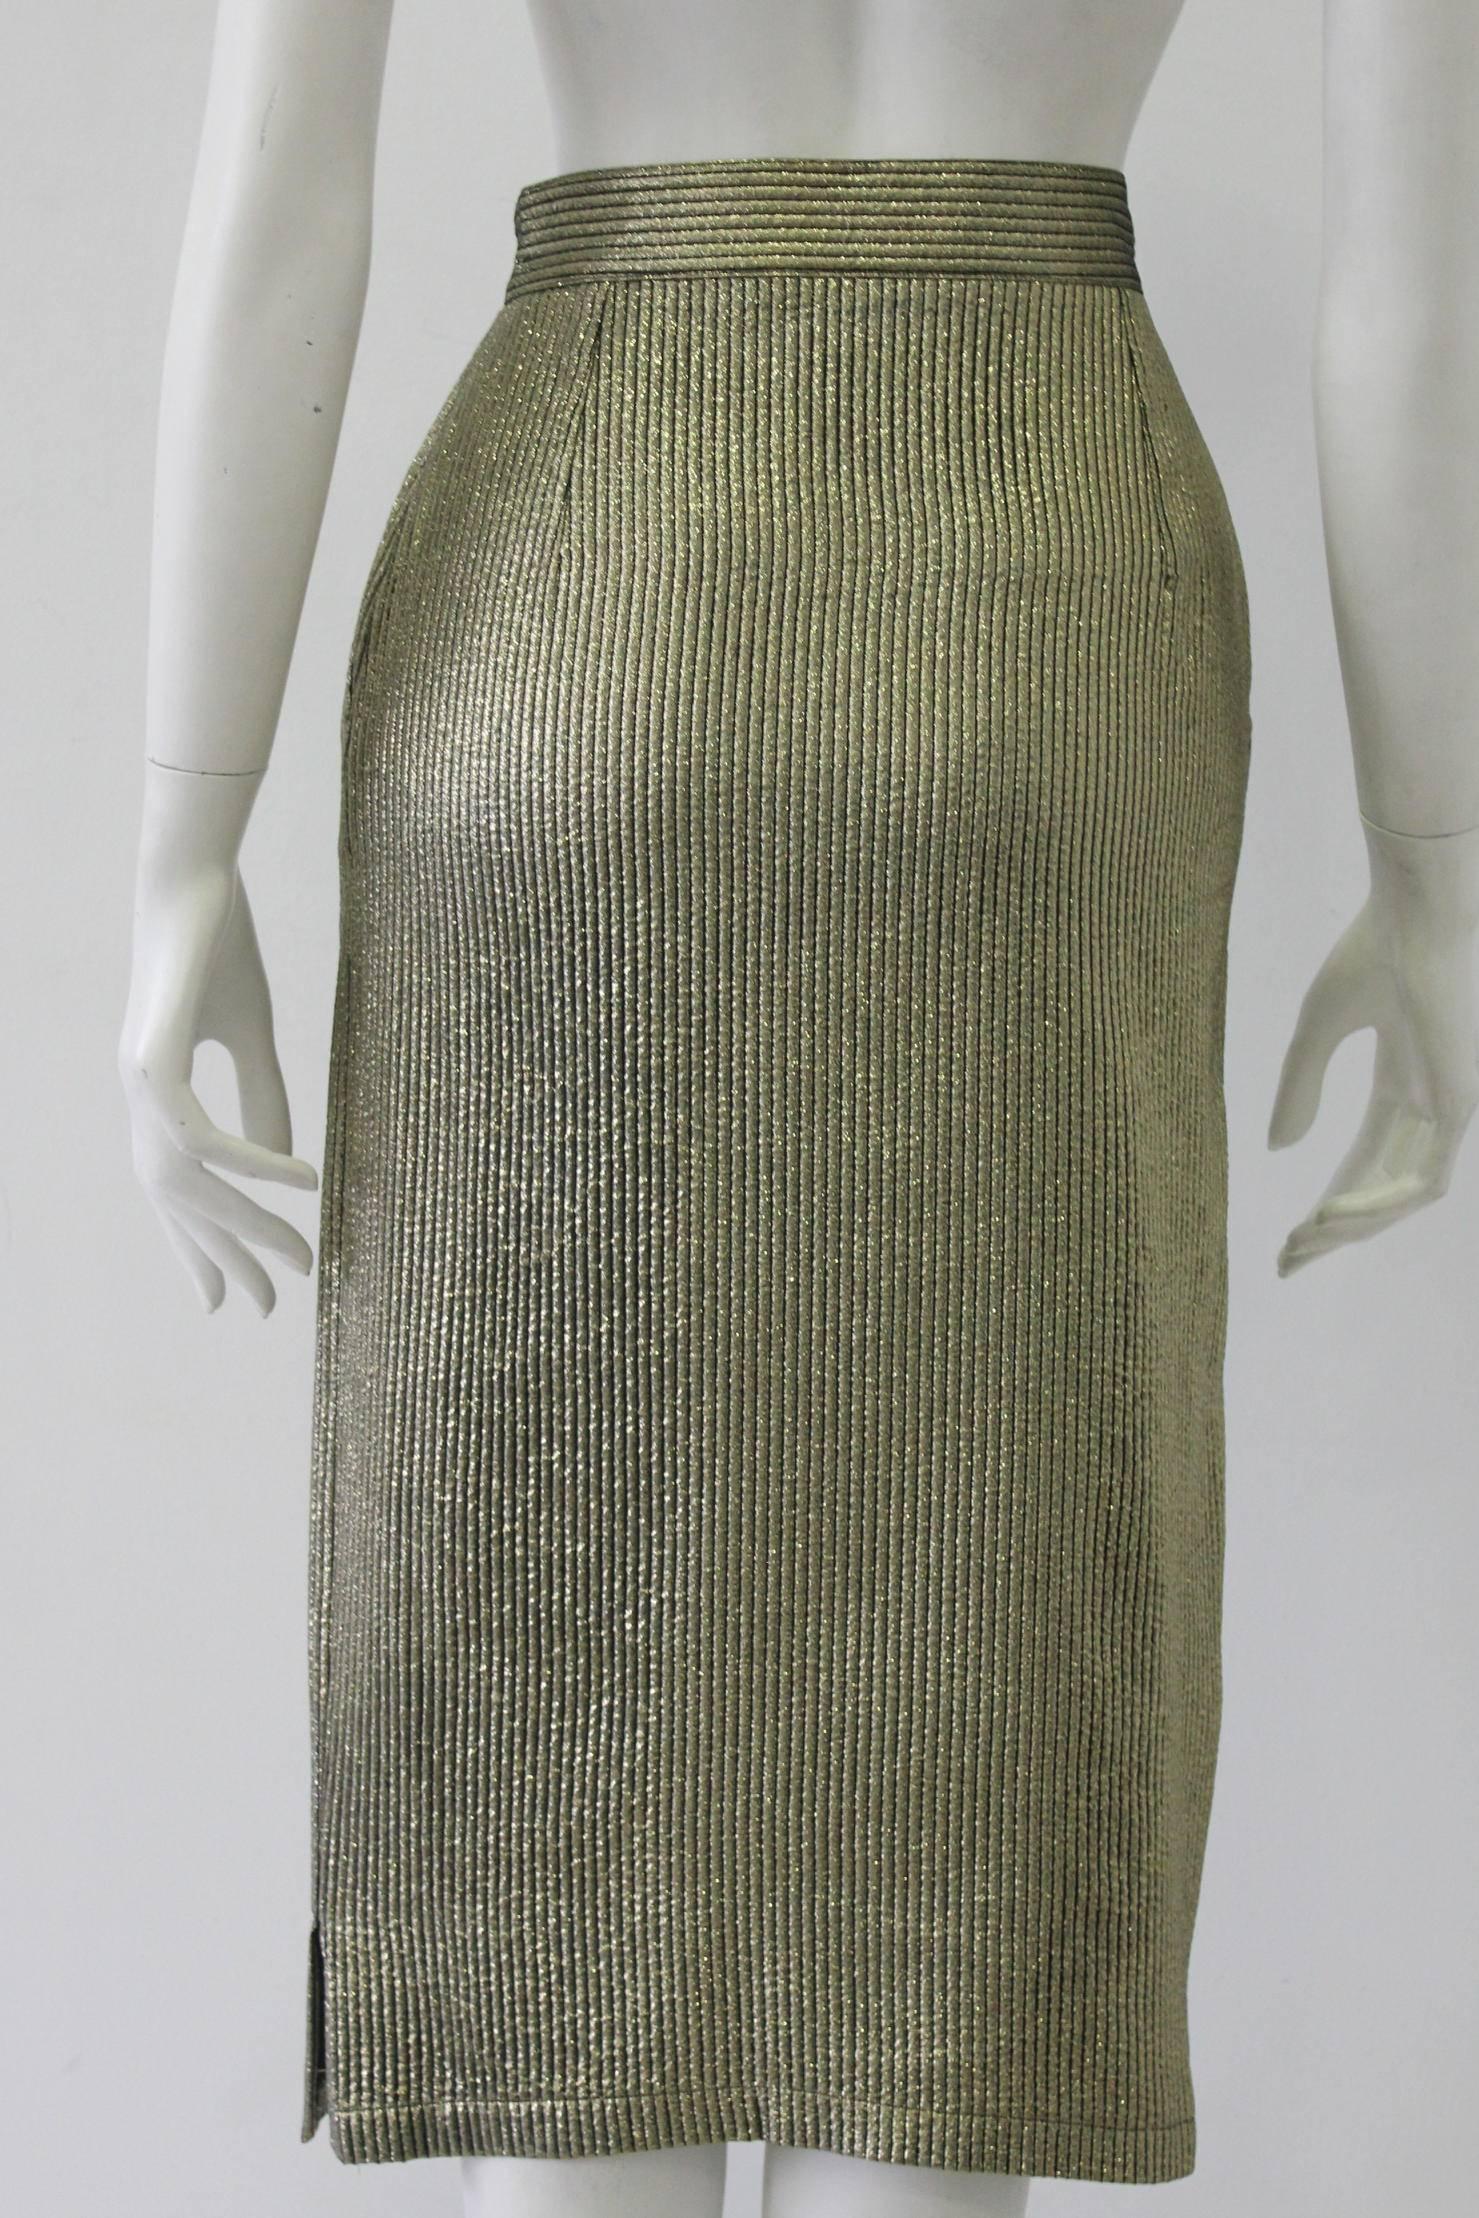 Women's Early Gianni Versace Brocade Gold Lurex Skirt For Sale